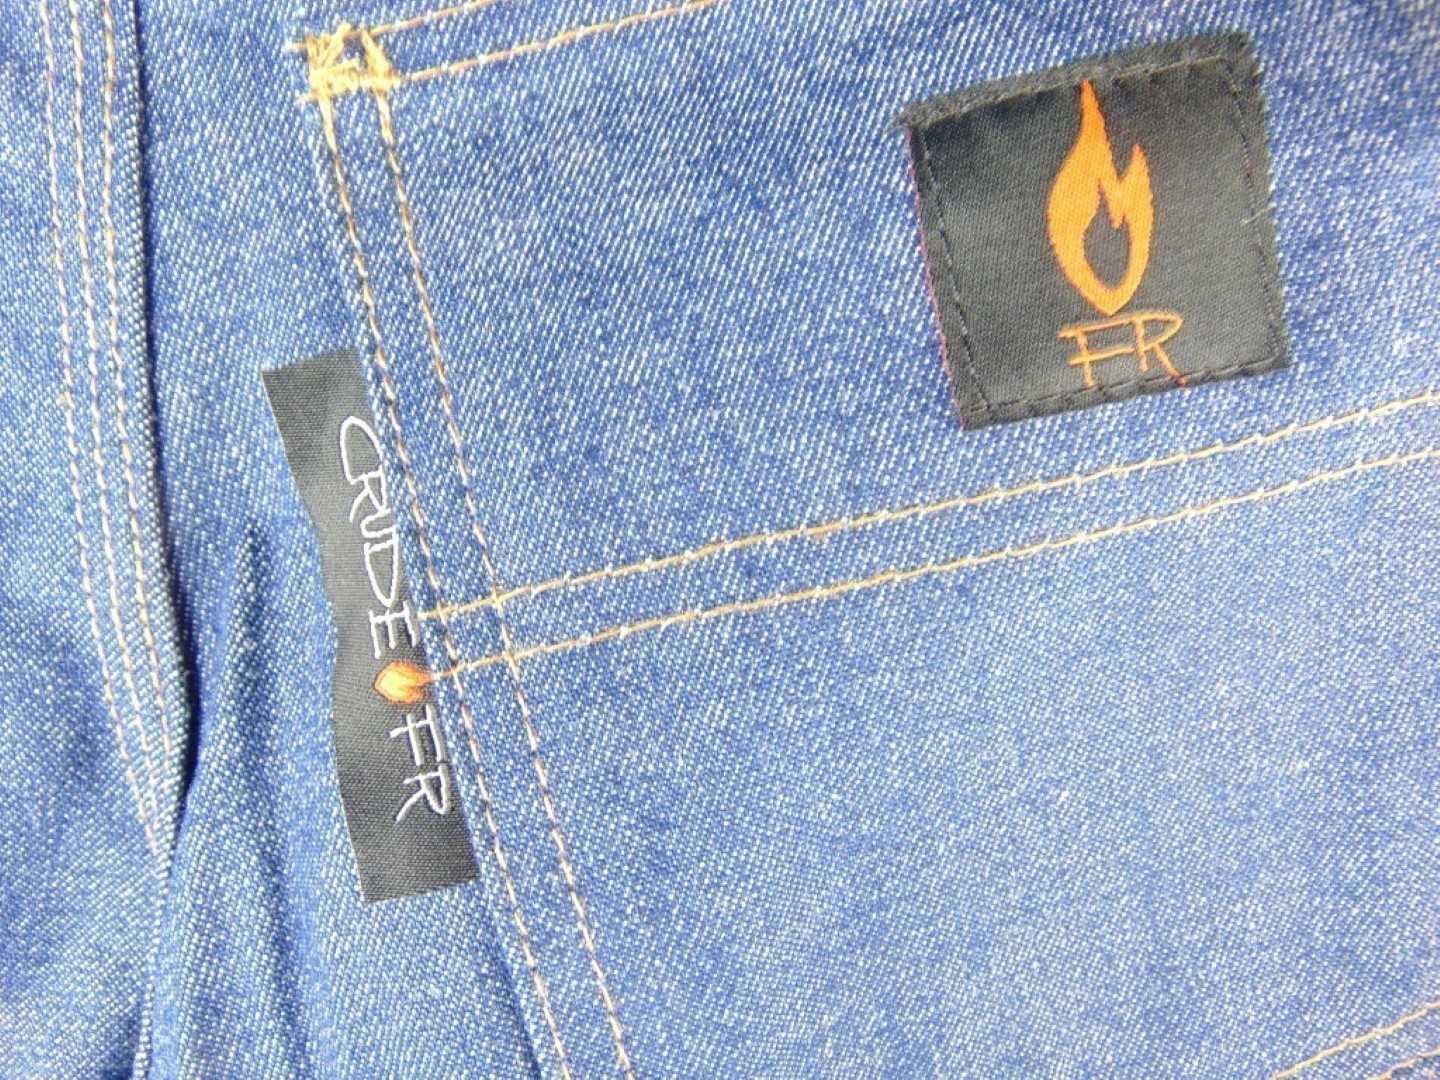 50x38U CRUDE FR / Flame Resistant Jeans (Unfinished Seam)